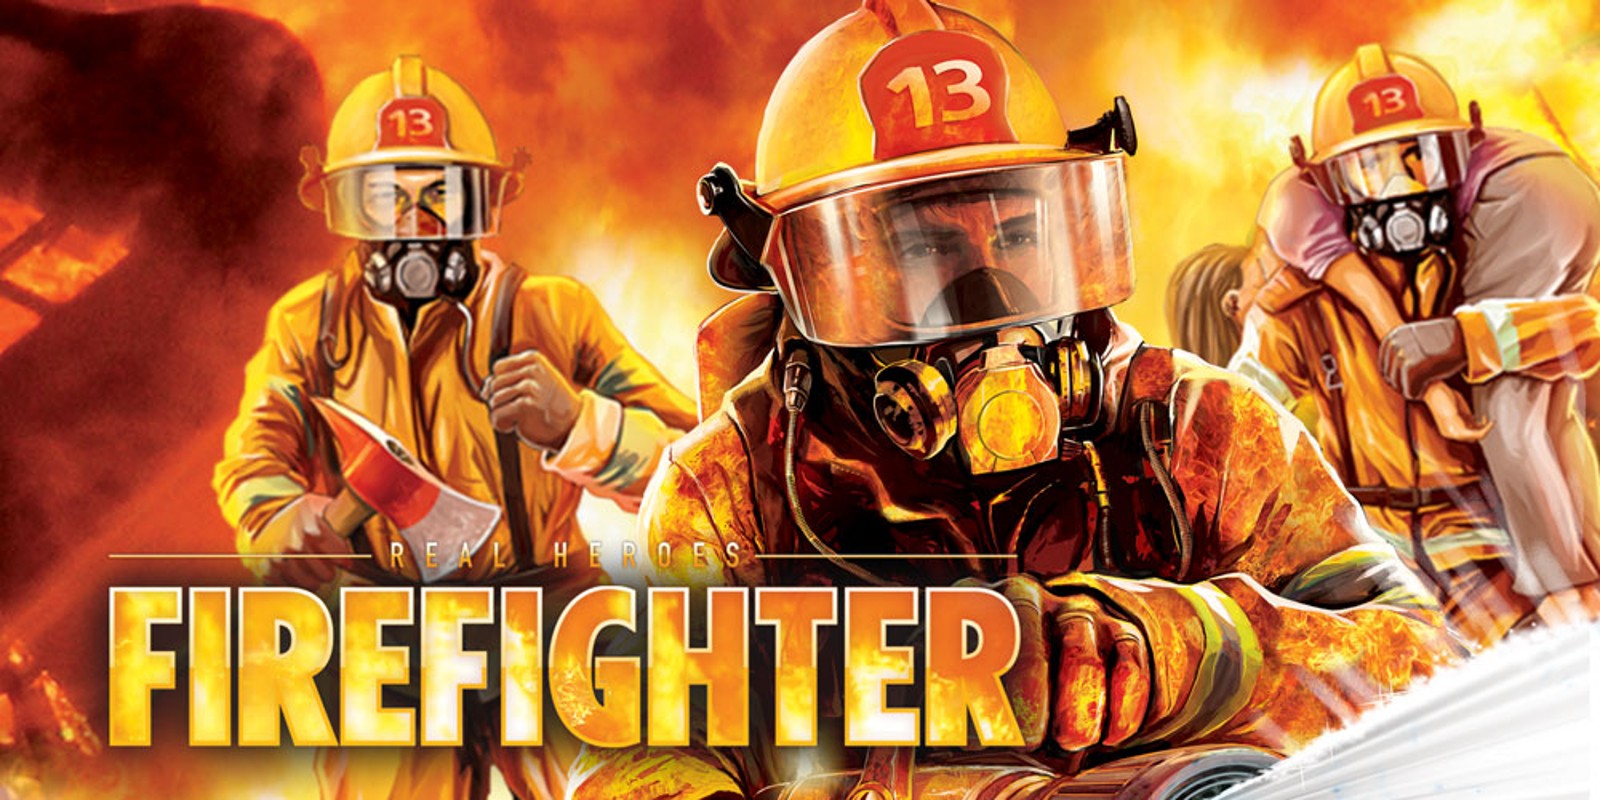 Real Heroes: FIREFIGHTER